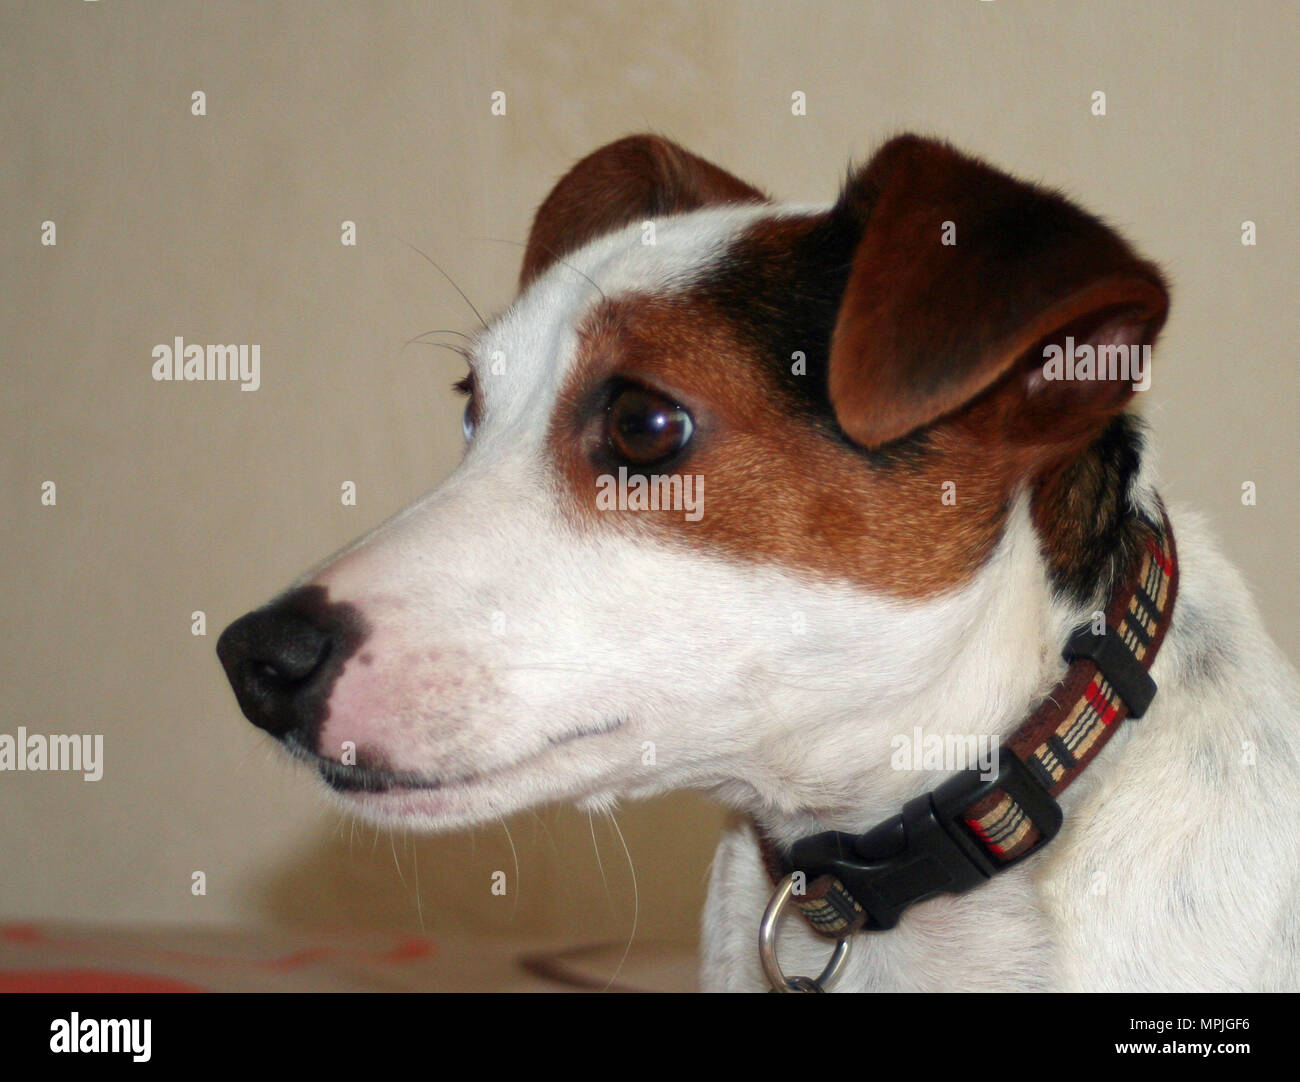 Kopf Un High Resolution Stock Photography and Images - Alamy